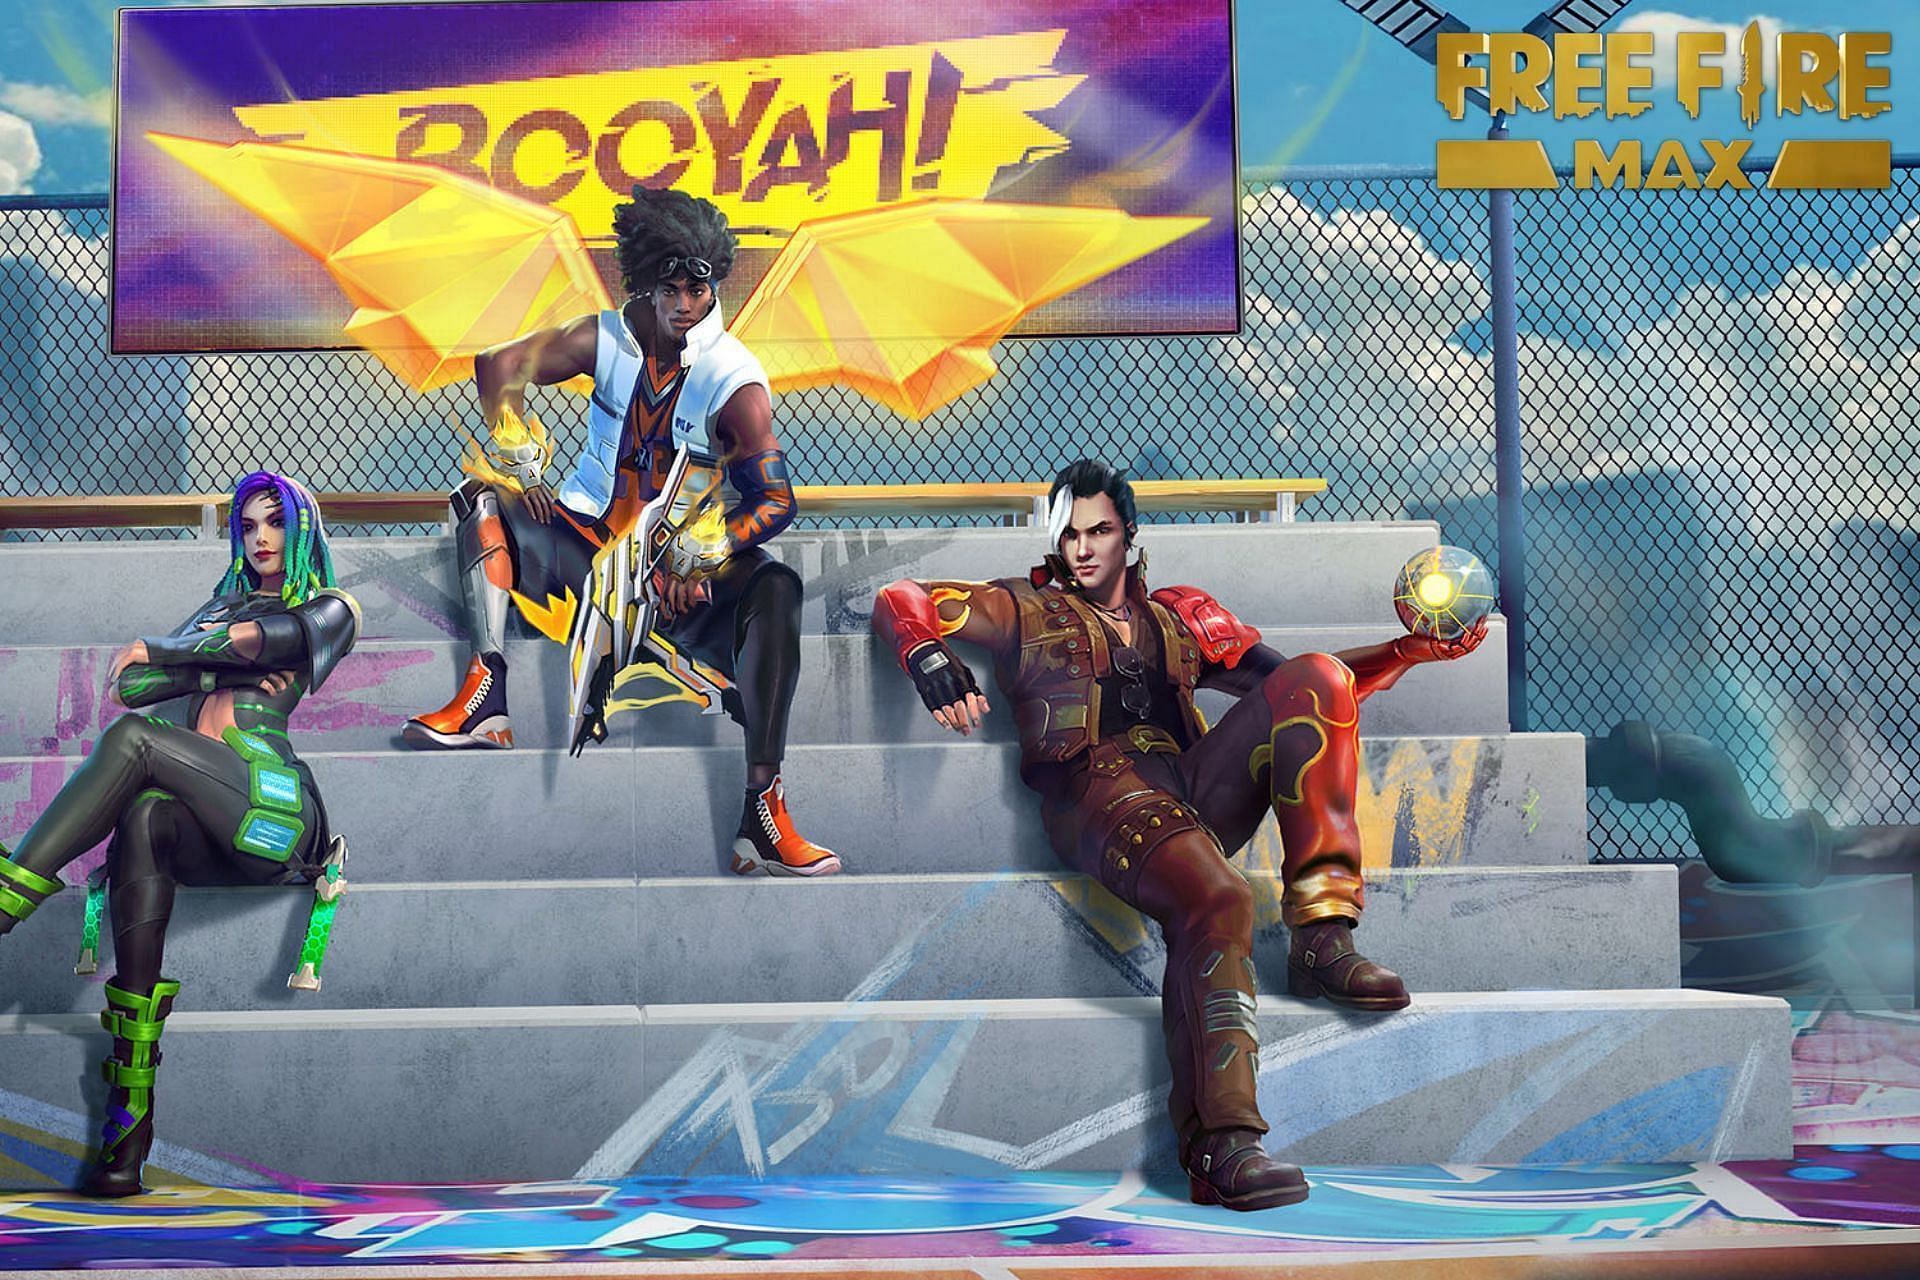 Emotes are a vital part of the Free Fire MAX experience (Image via Garena)